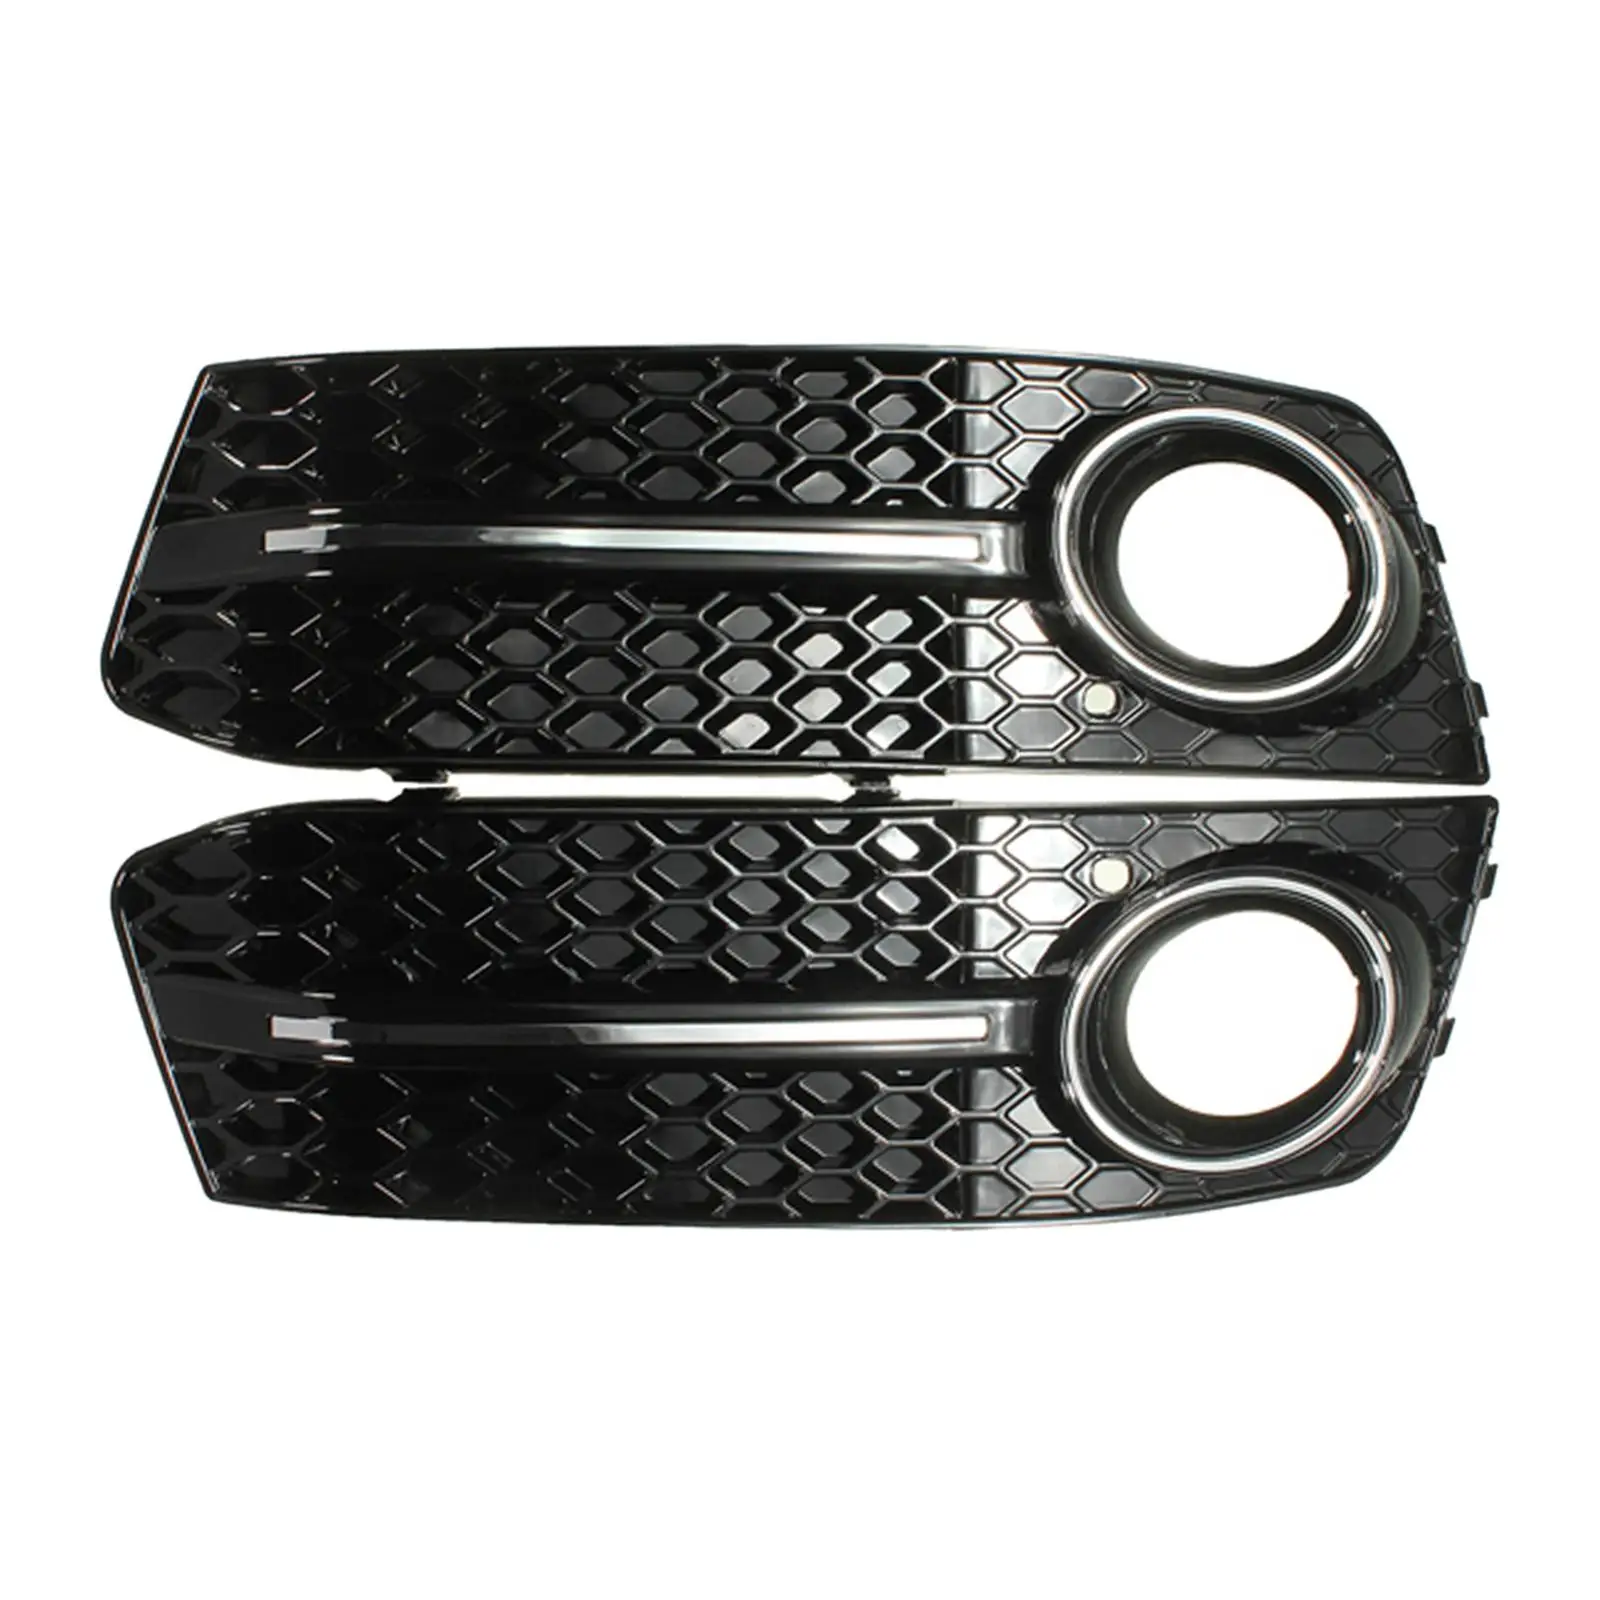 

2x Light Cover Grille 8K0807681 Left Right Honeycomb Glossy Black for A4 B8 Replacement Durable